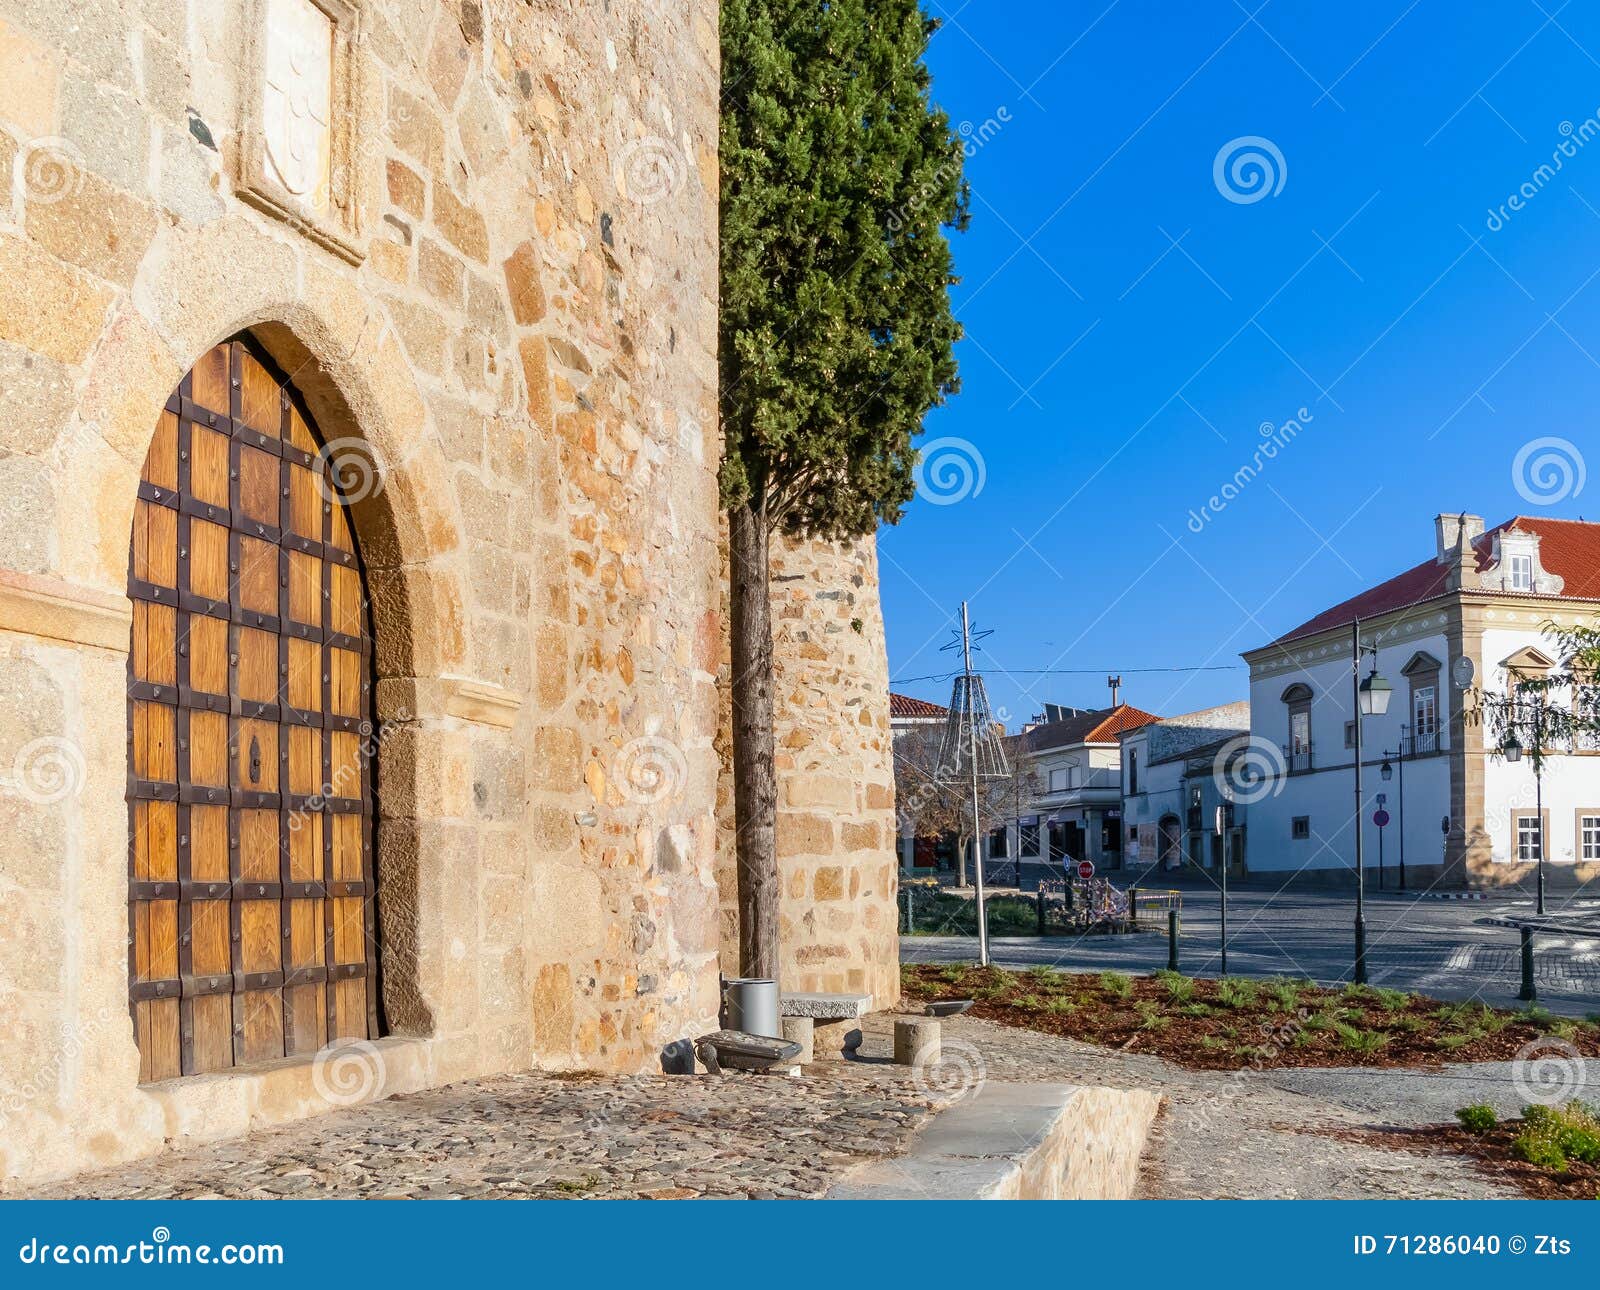 gate of the medieval castle of alter do chao, in the portalegre district.